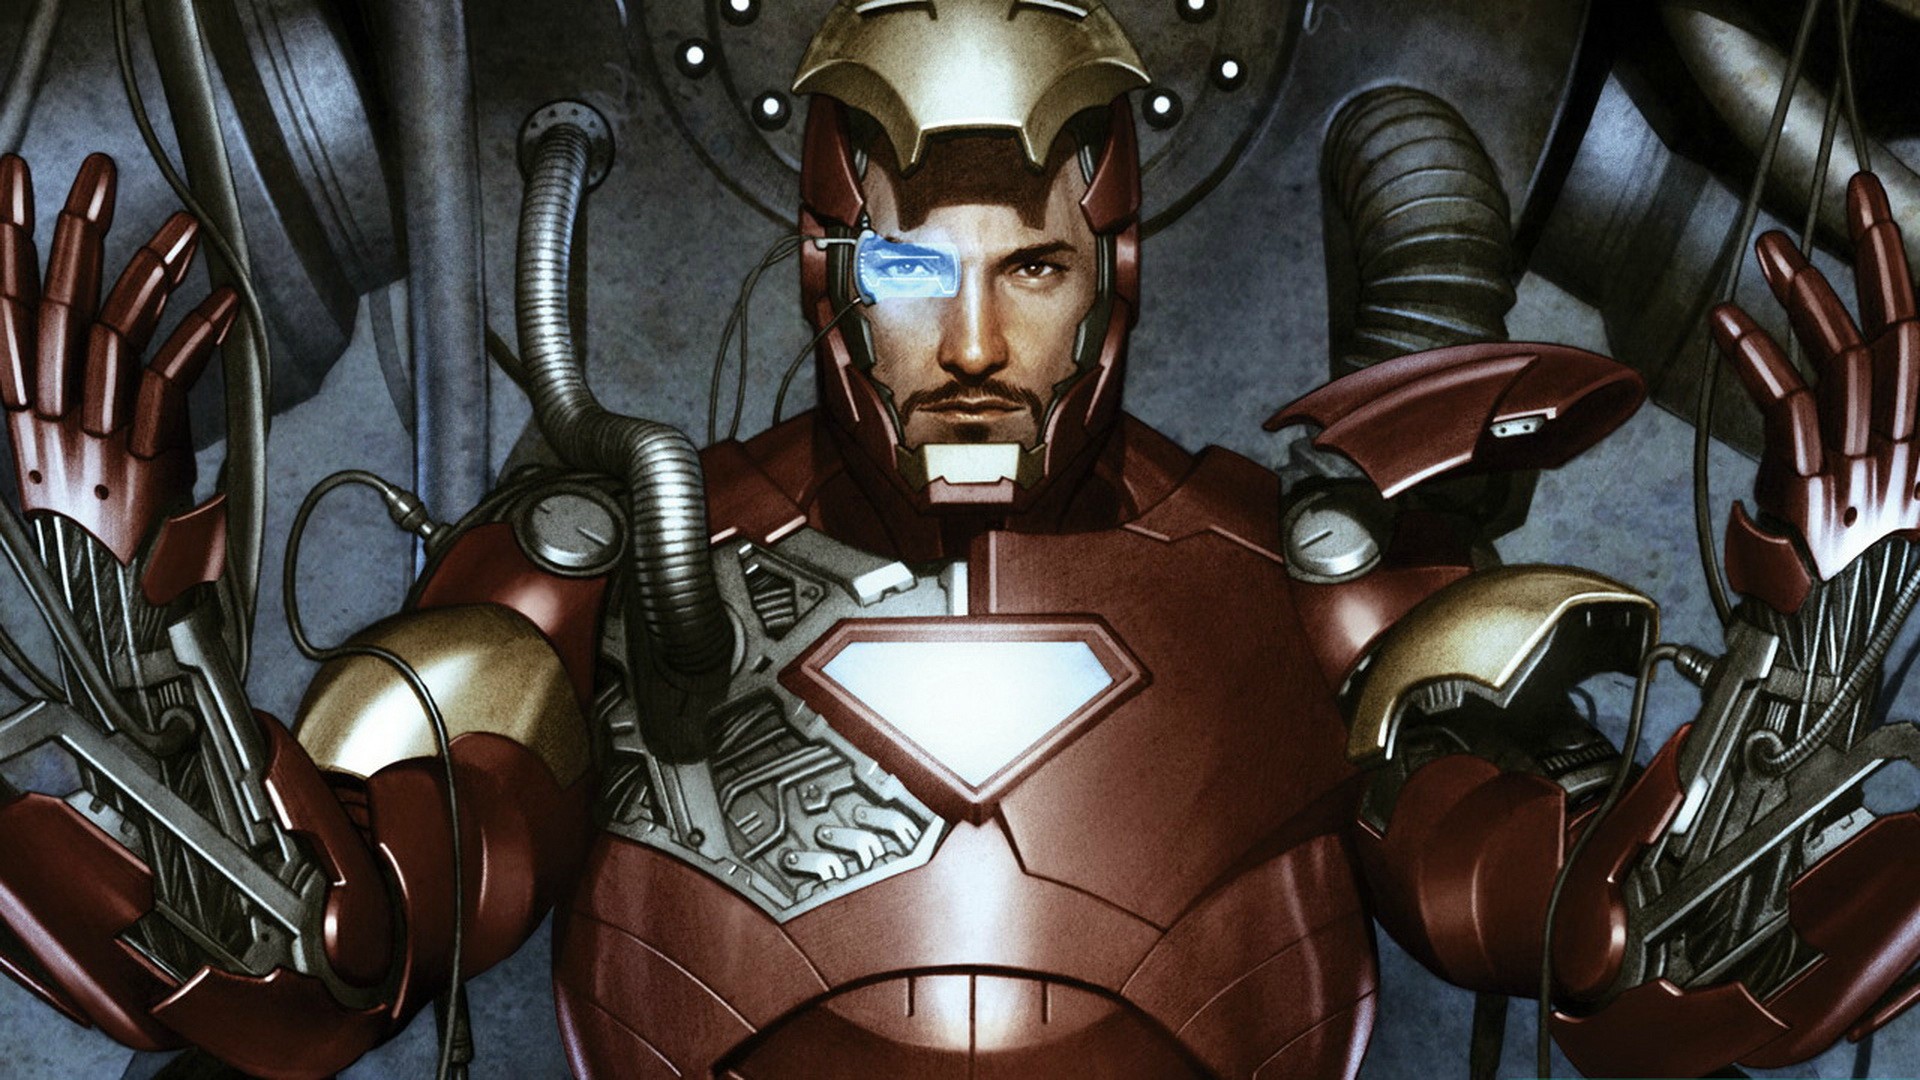 Iron Man animated picture for desktop and wallpaper   Picture for 1920x1080